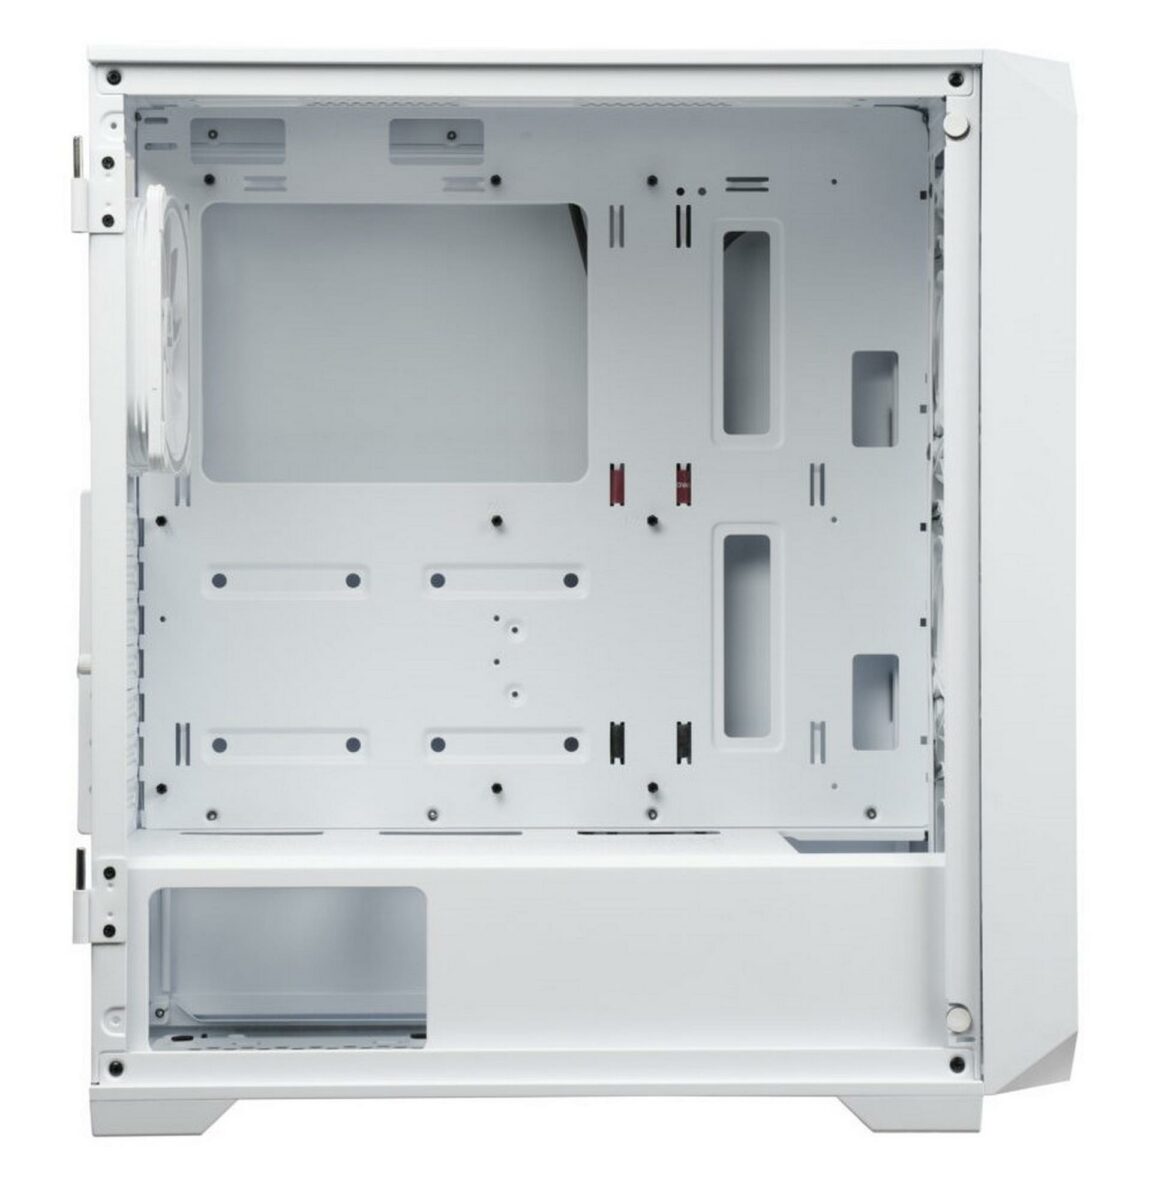 Inside the special white edition Enermax Enerpazo EP237 chassis.